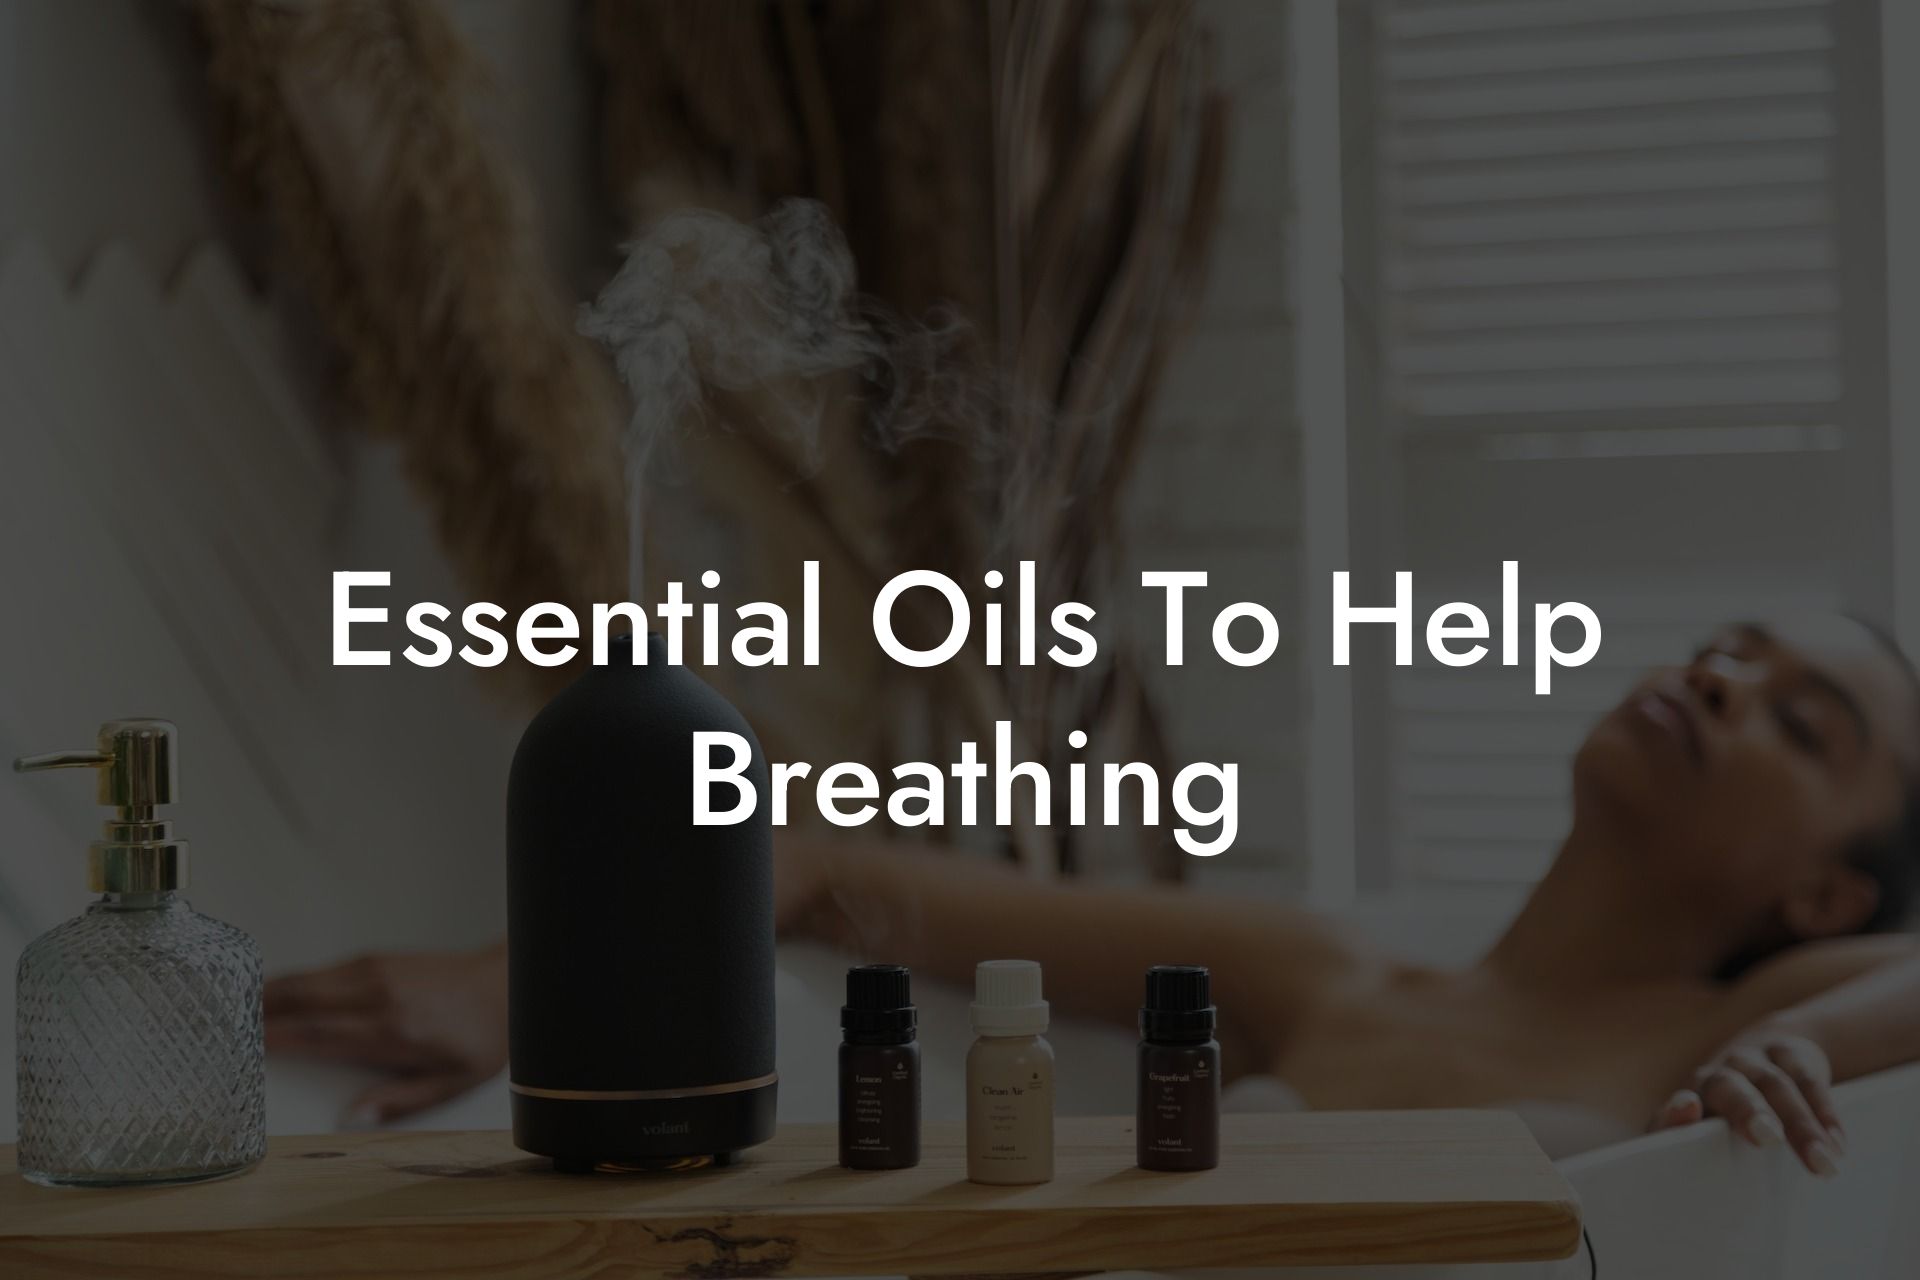 Essential Oils To Help Breathing